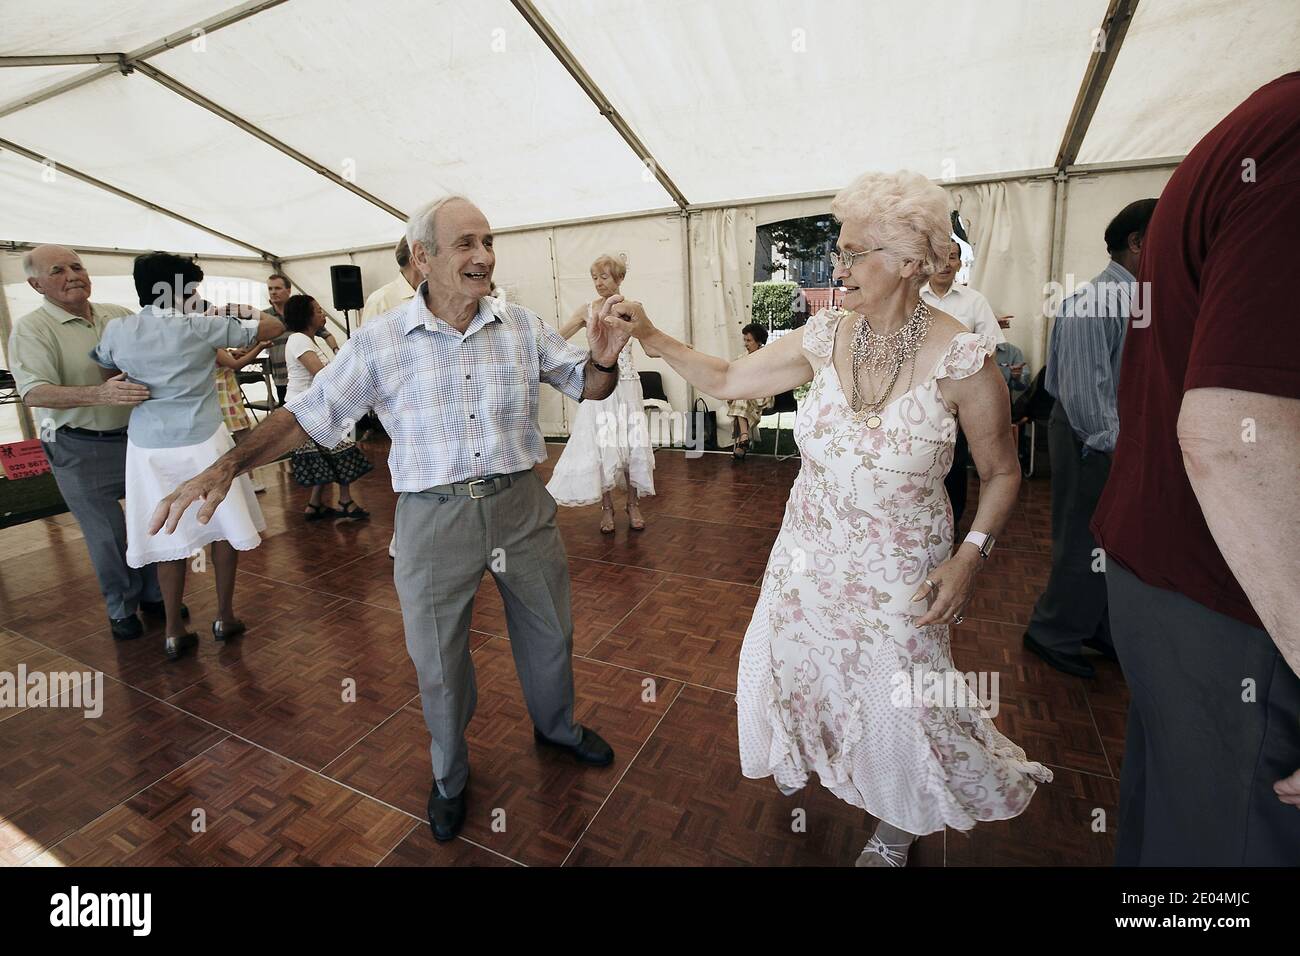 GREAT BRITAIN / London/ older couple is dancing together Stock Photo